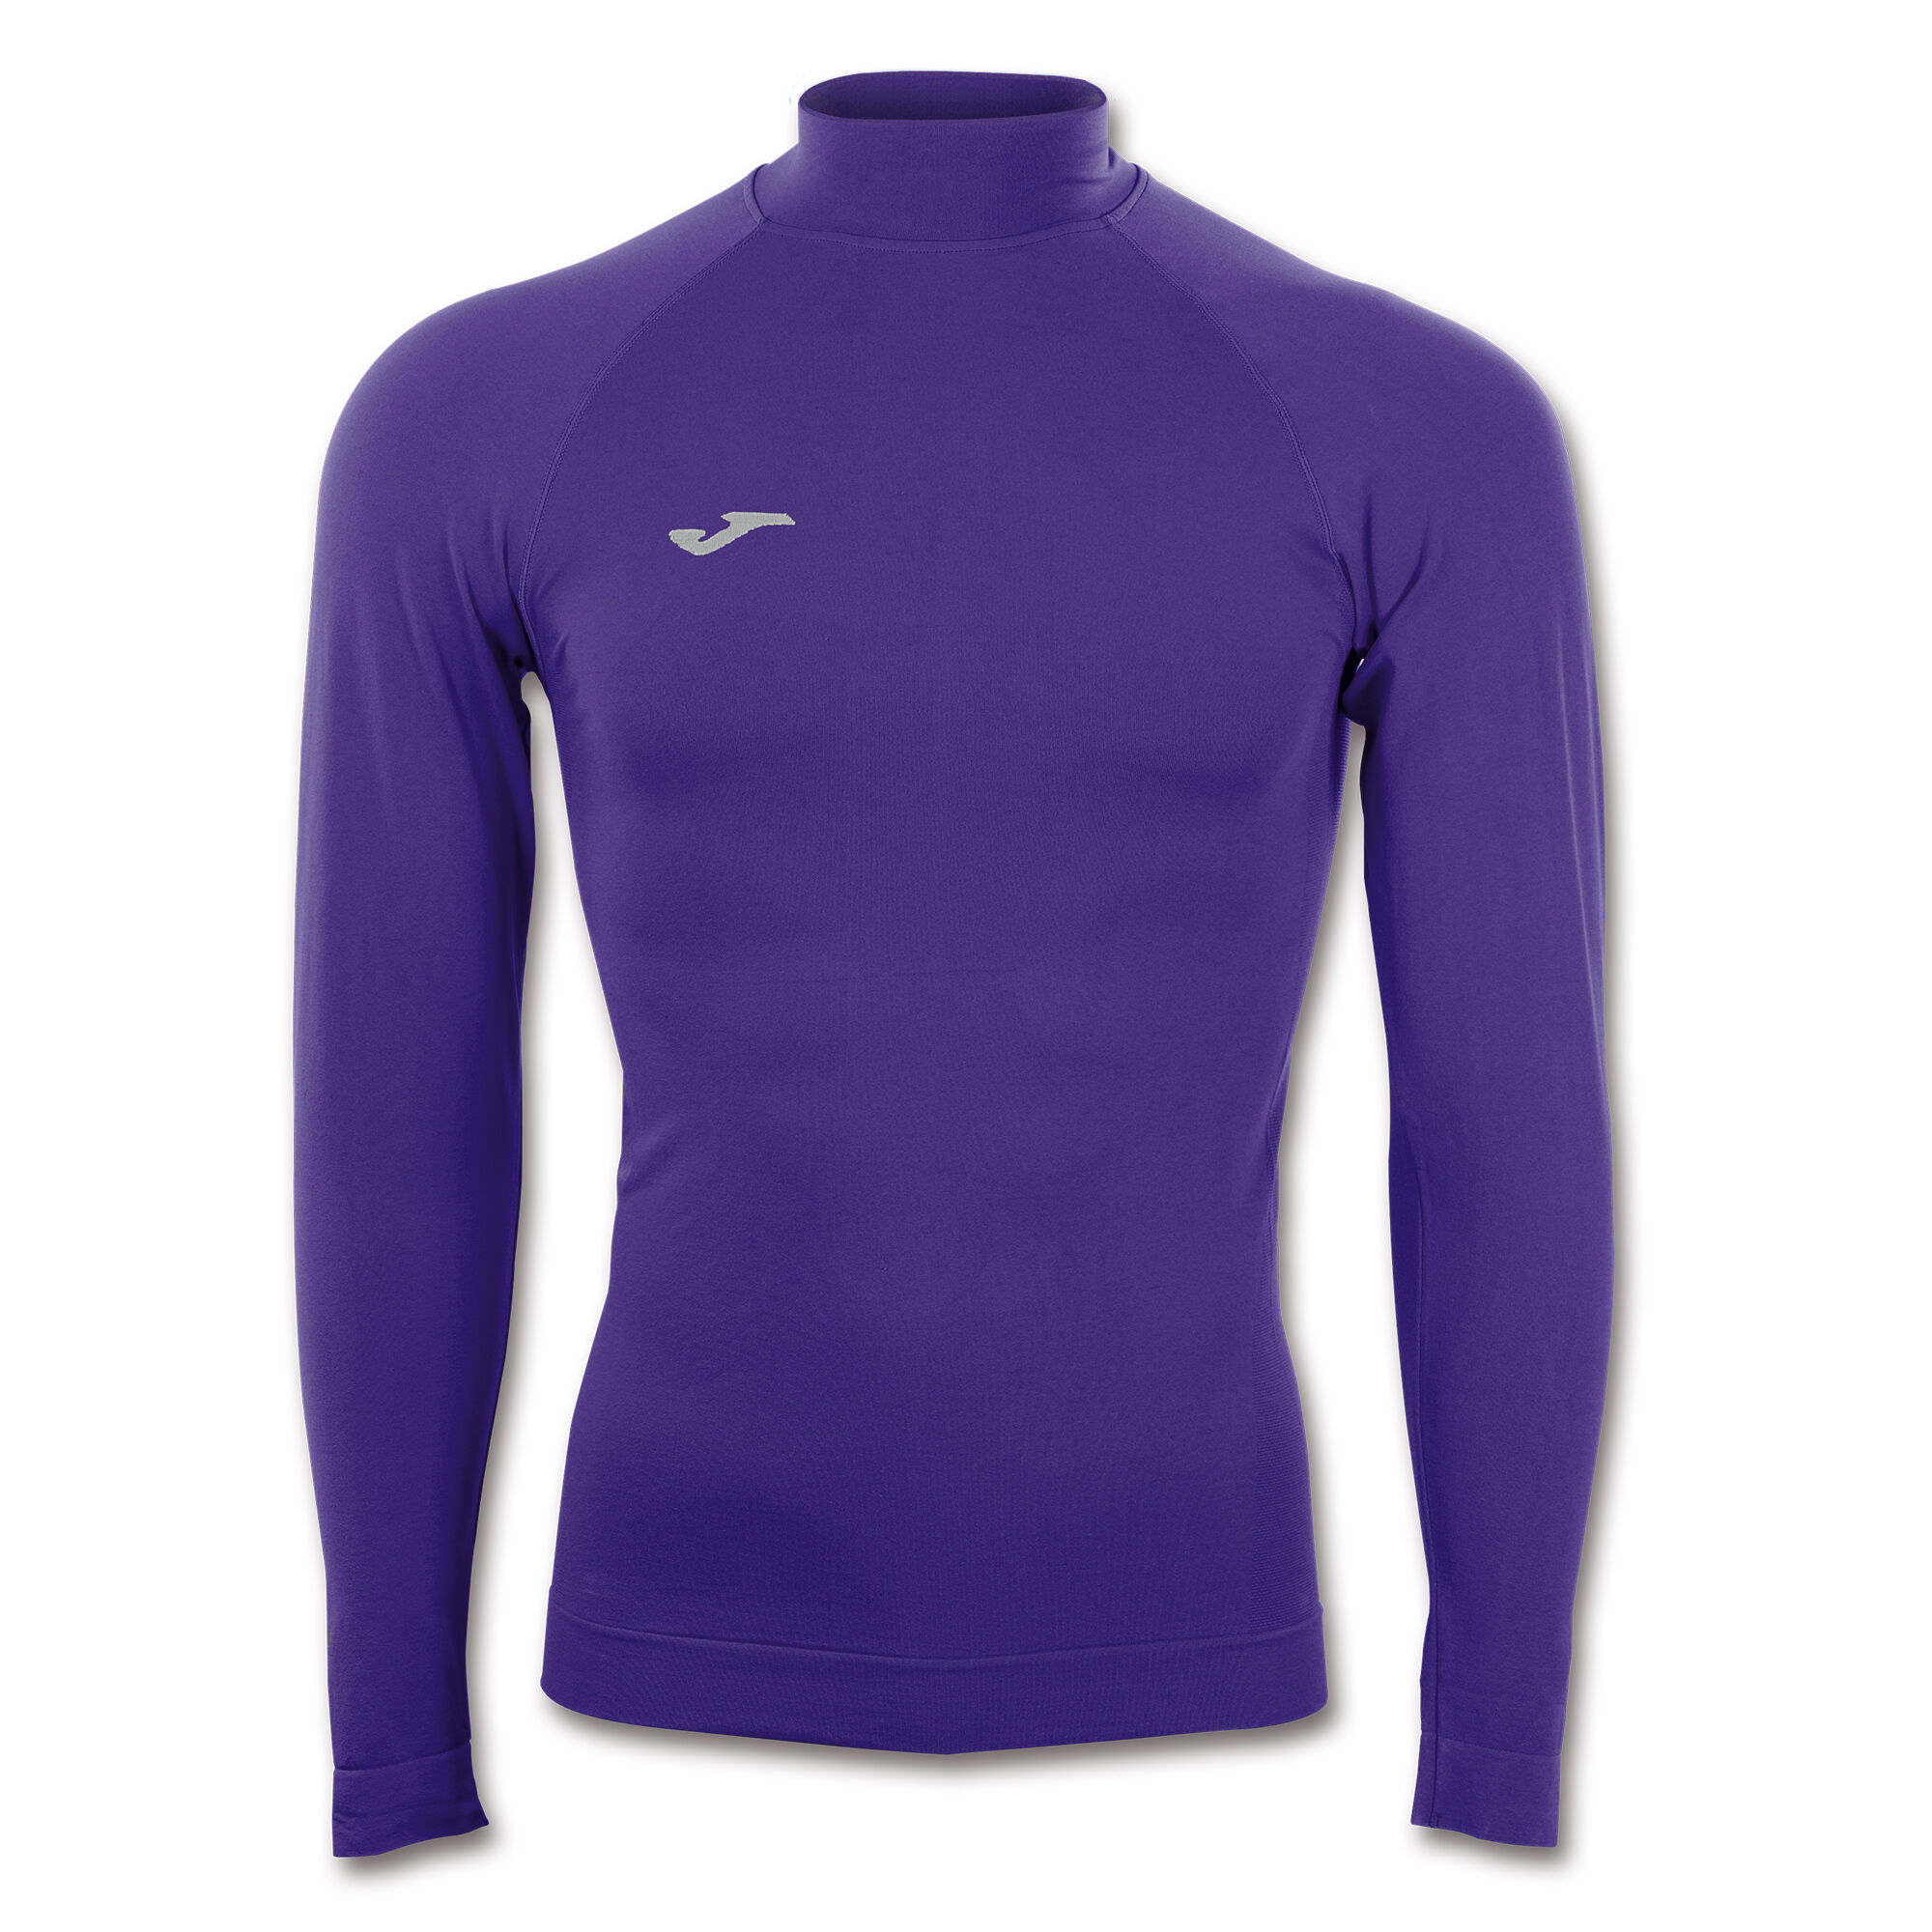 MAILLOT MANCHES LONGUES UNISEXE BRAMA CLASSIC VIOLET